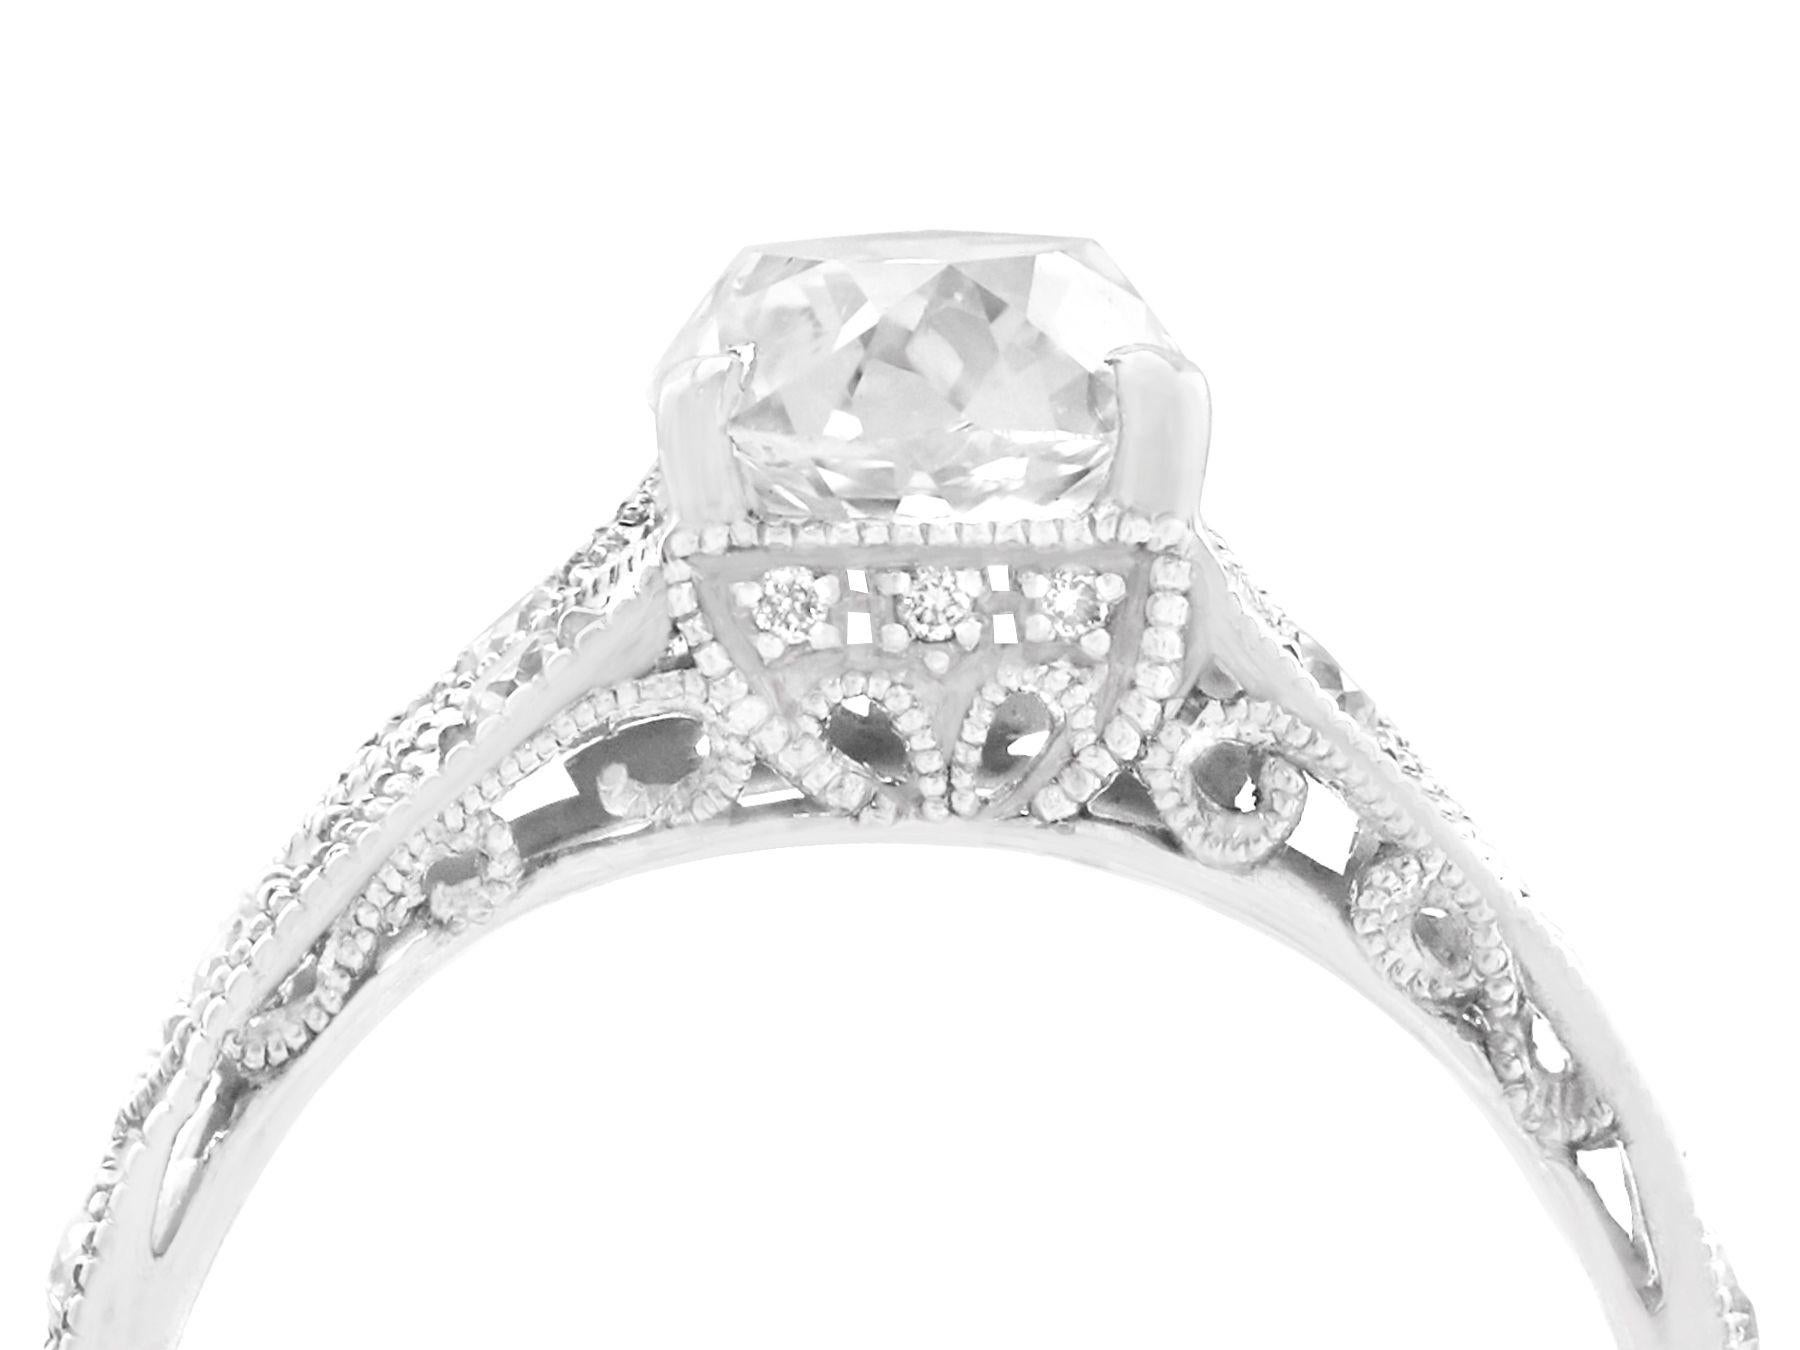 A fine and impressive antique 1.34 carat diamond (total) solitaire displayed in a contemporary platinum setting; part of our diamond jewelry collections.

This fine diamond engagement ring ring has been crafted in platinum.

The solitaire ring